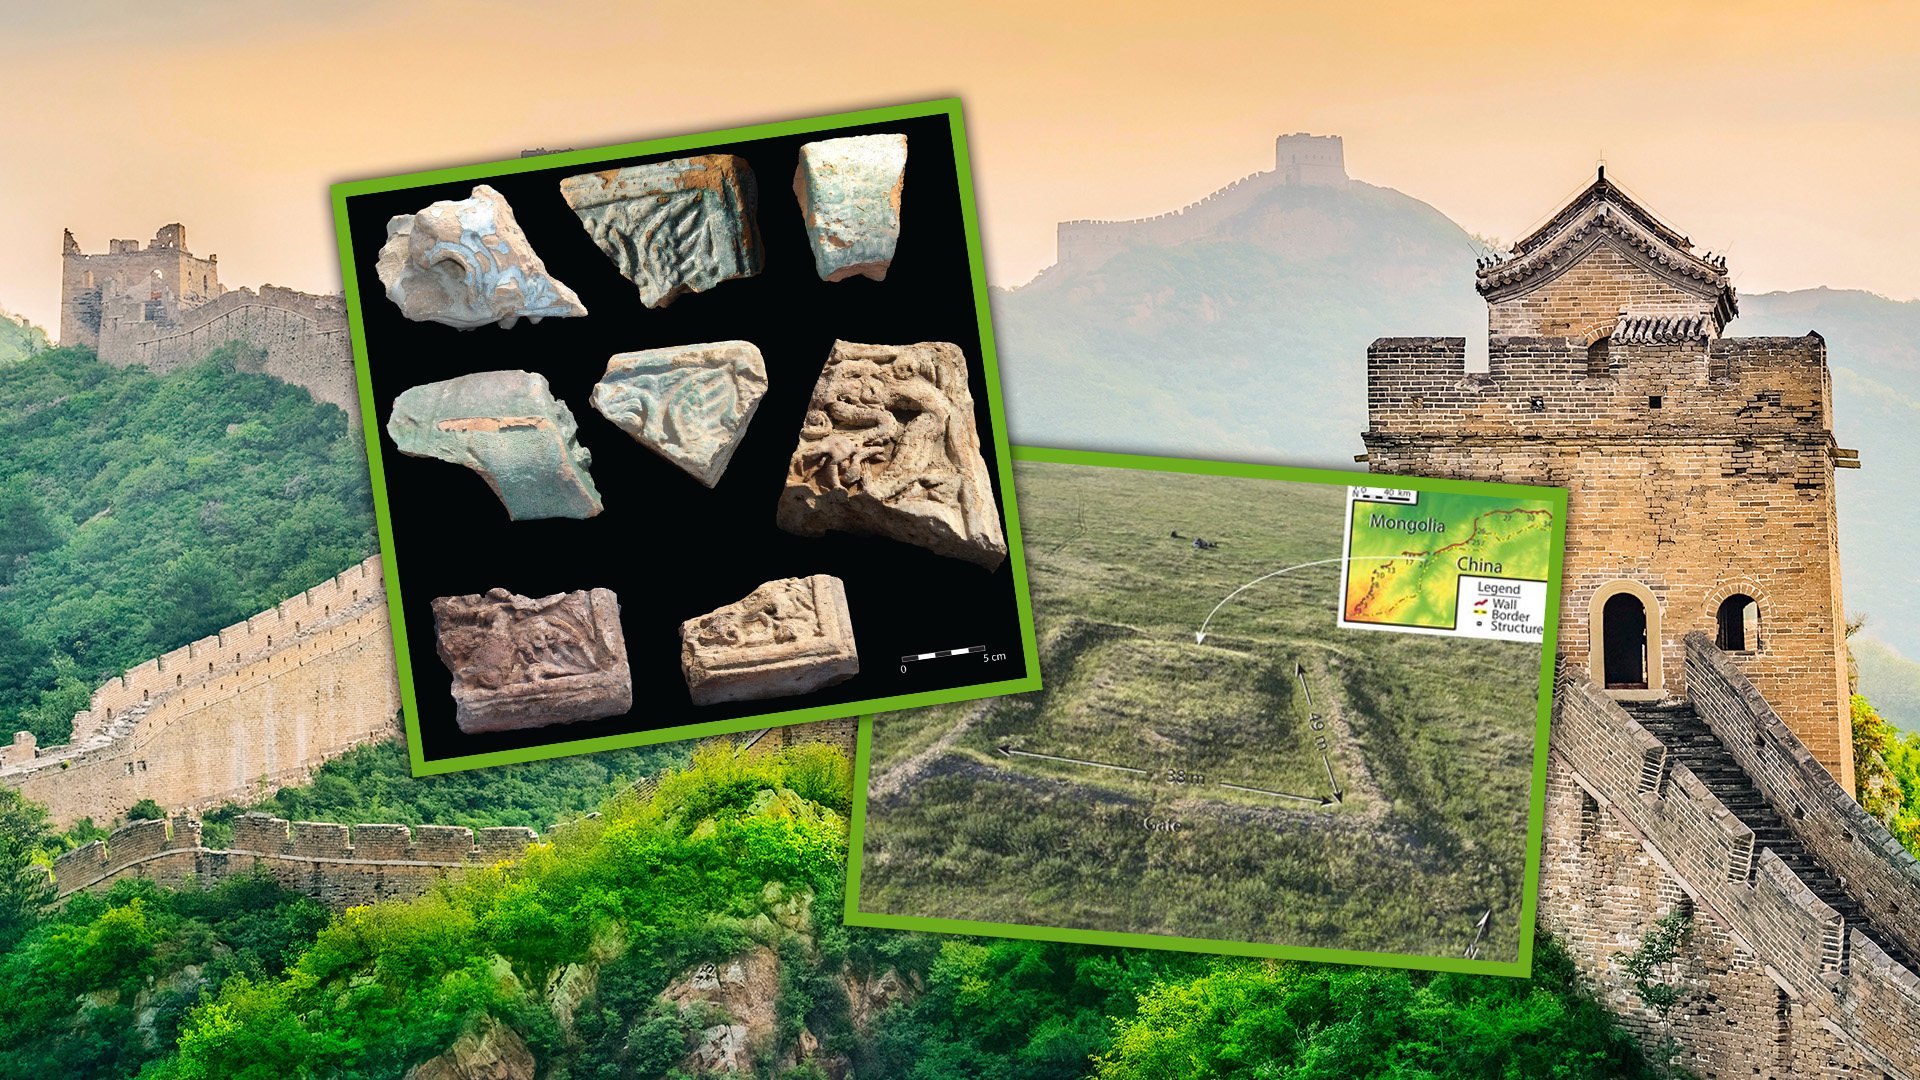 New research suggests sections of the Great Wall of China in the north of the country and in Mongolia may have been hastily built, possibly to defend against invading Mongol armies because they were never completed. Photo: SCMP composite/tandfonline.com